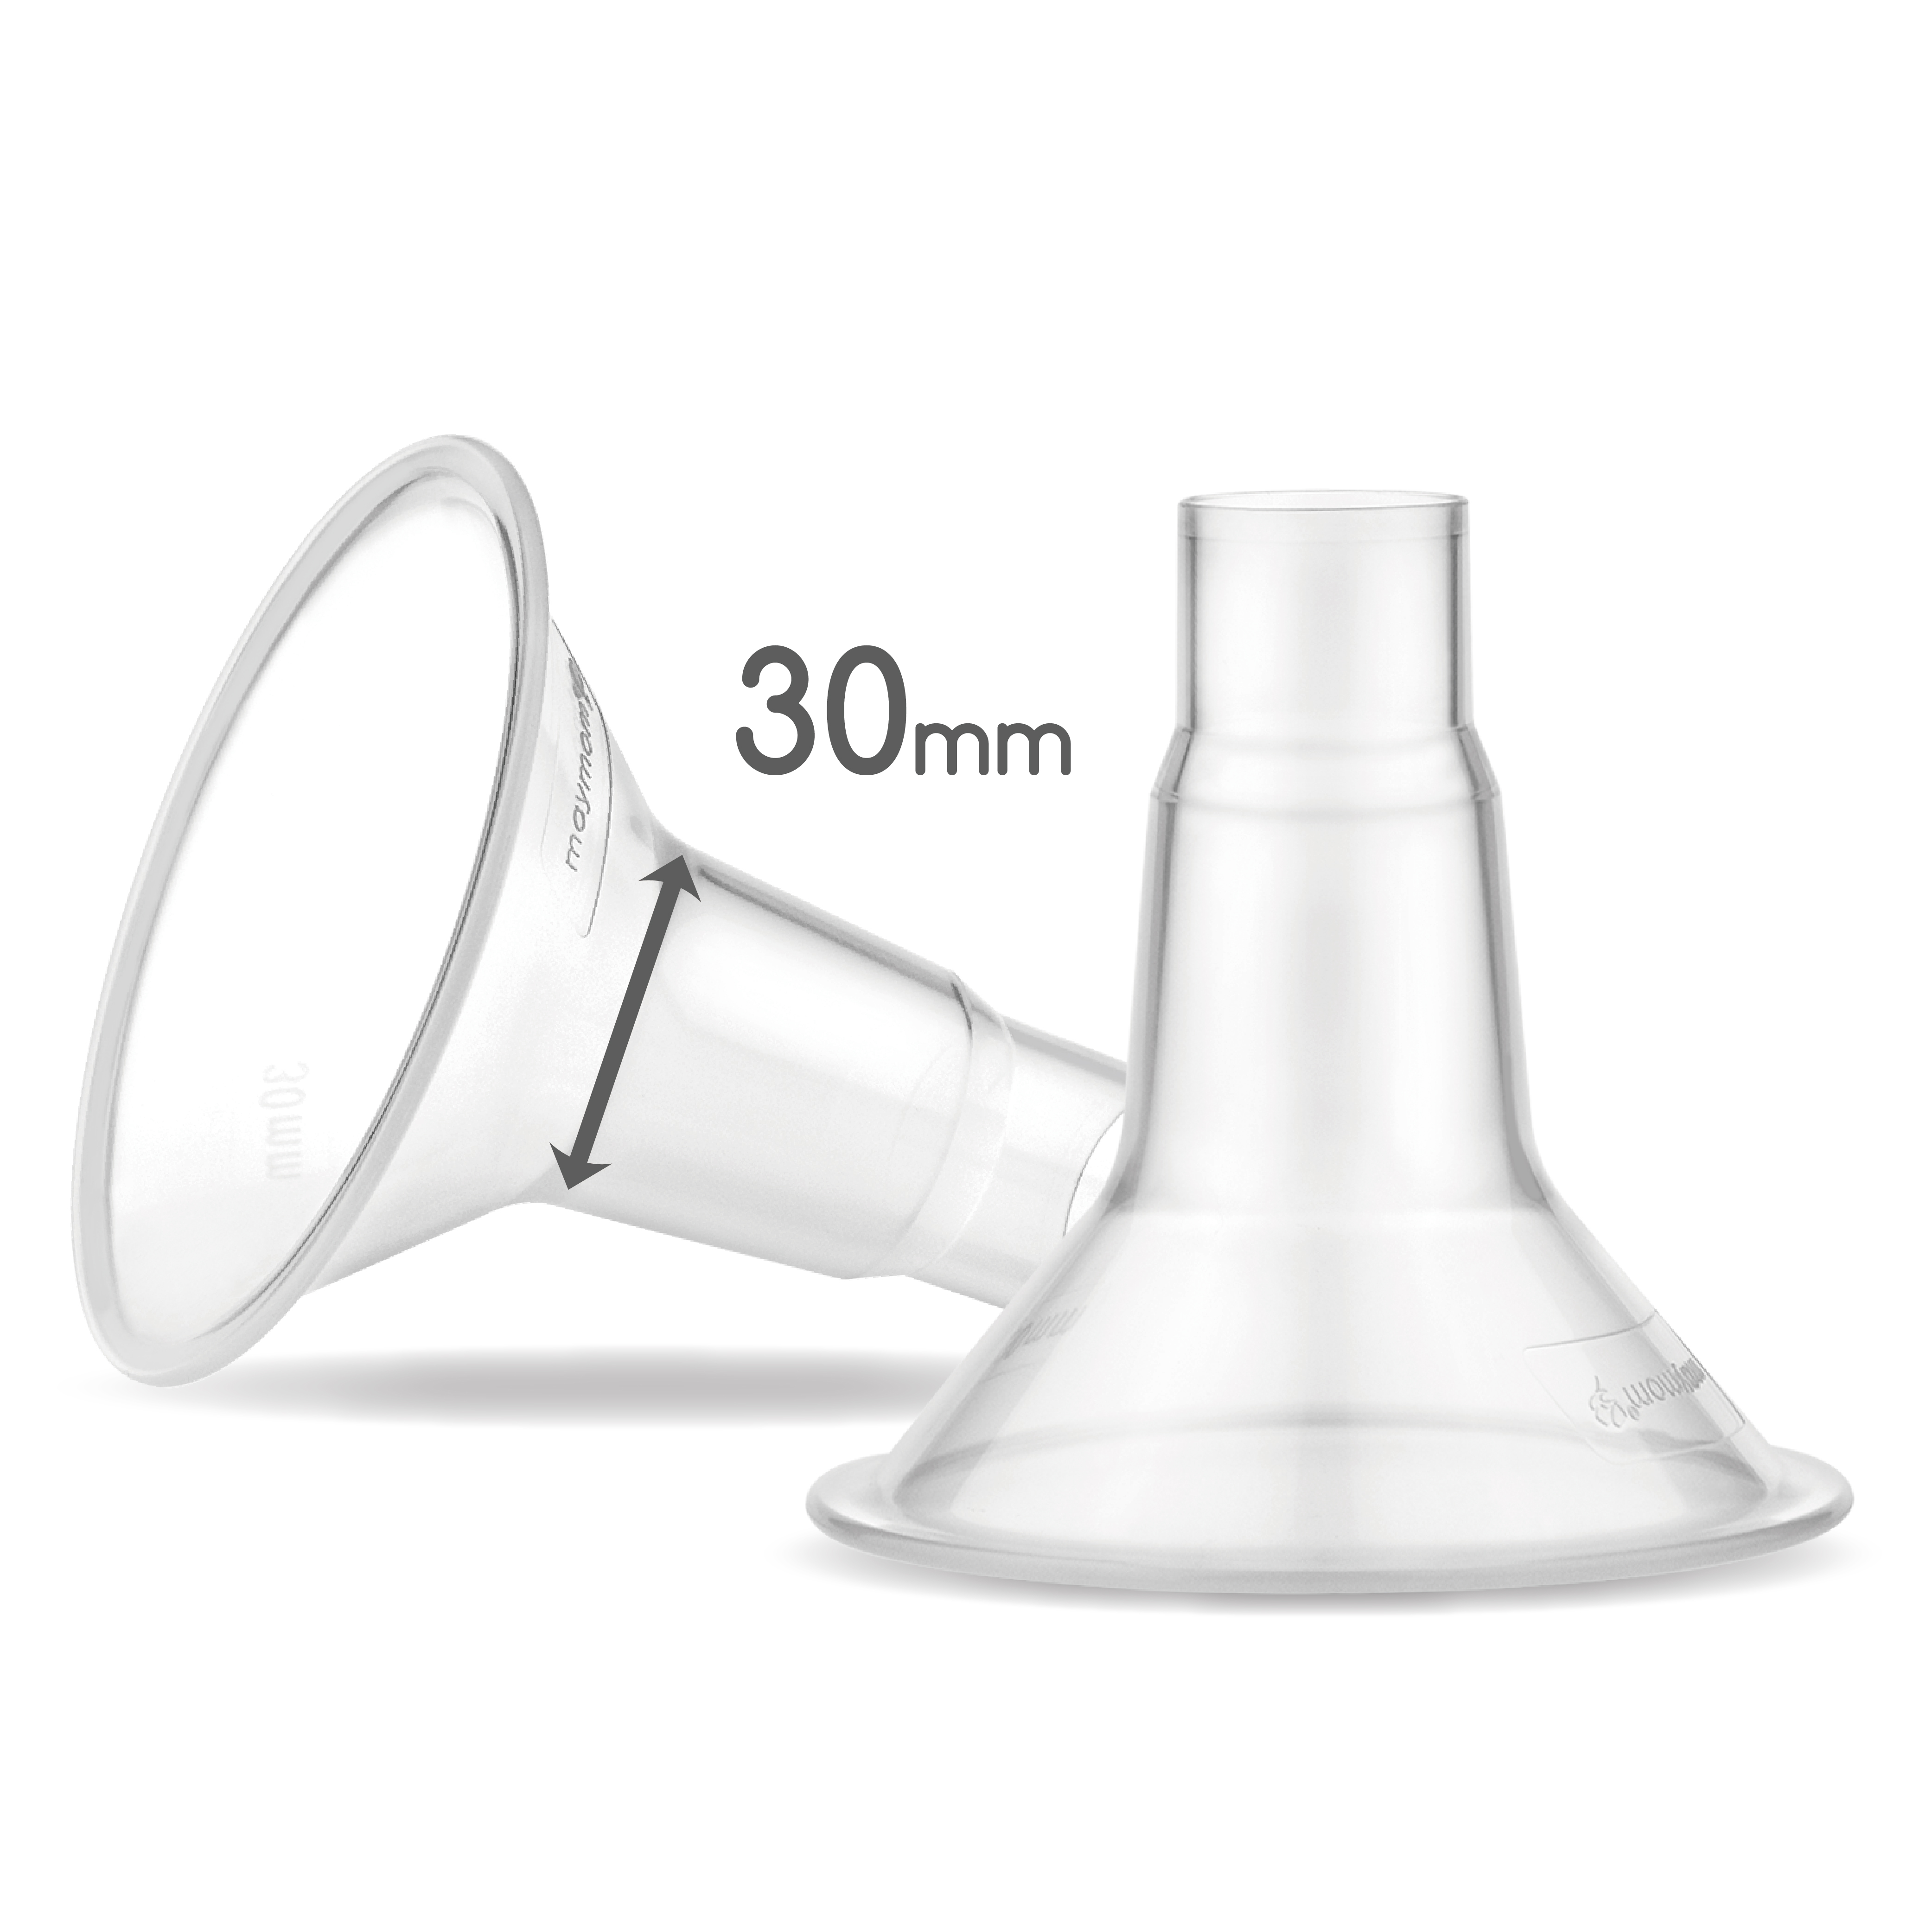 MyFit 30 mm Shield; Compatible with Medela Breast Pumps Having PersonalFit, Freestyle, Harmony, Maxi Connector; Connects; 2pc